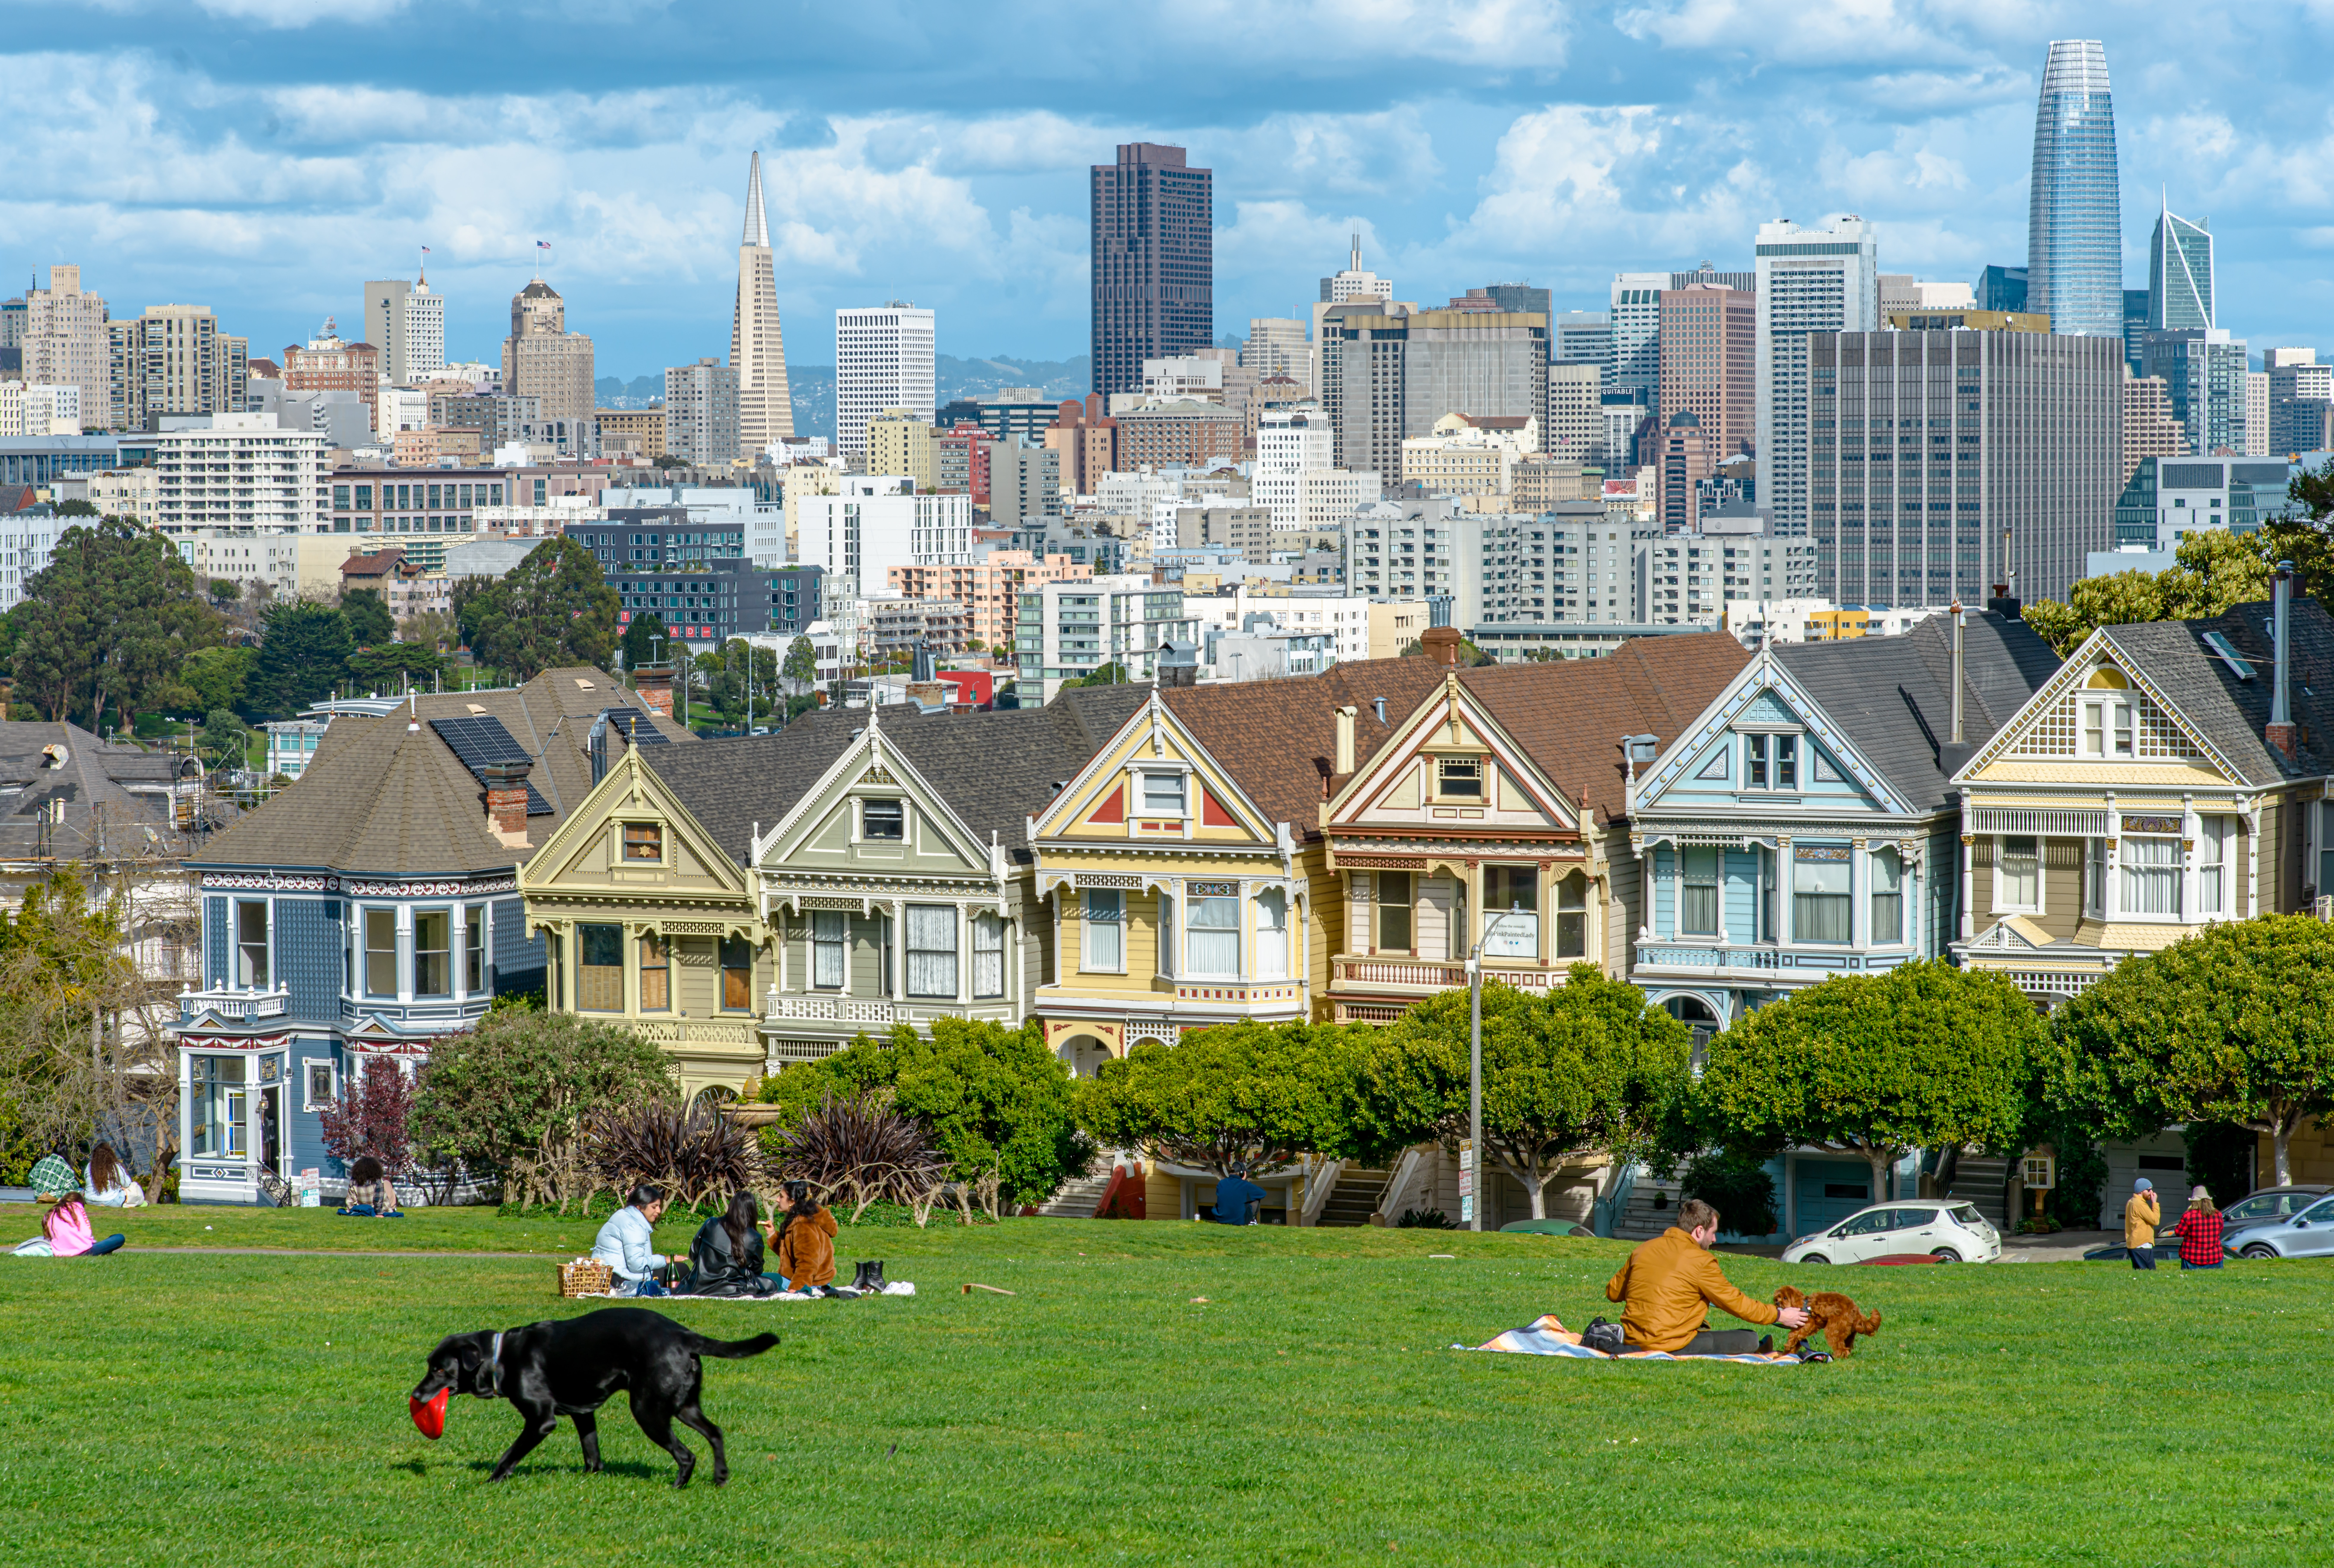 Alamo Square with the Painted Ladies View in San Francisco